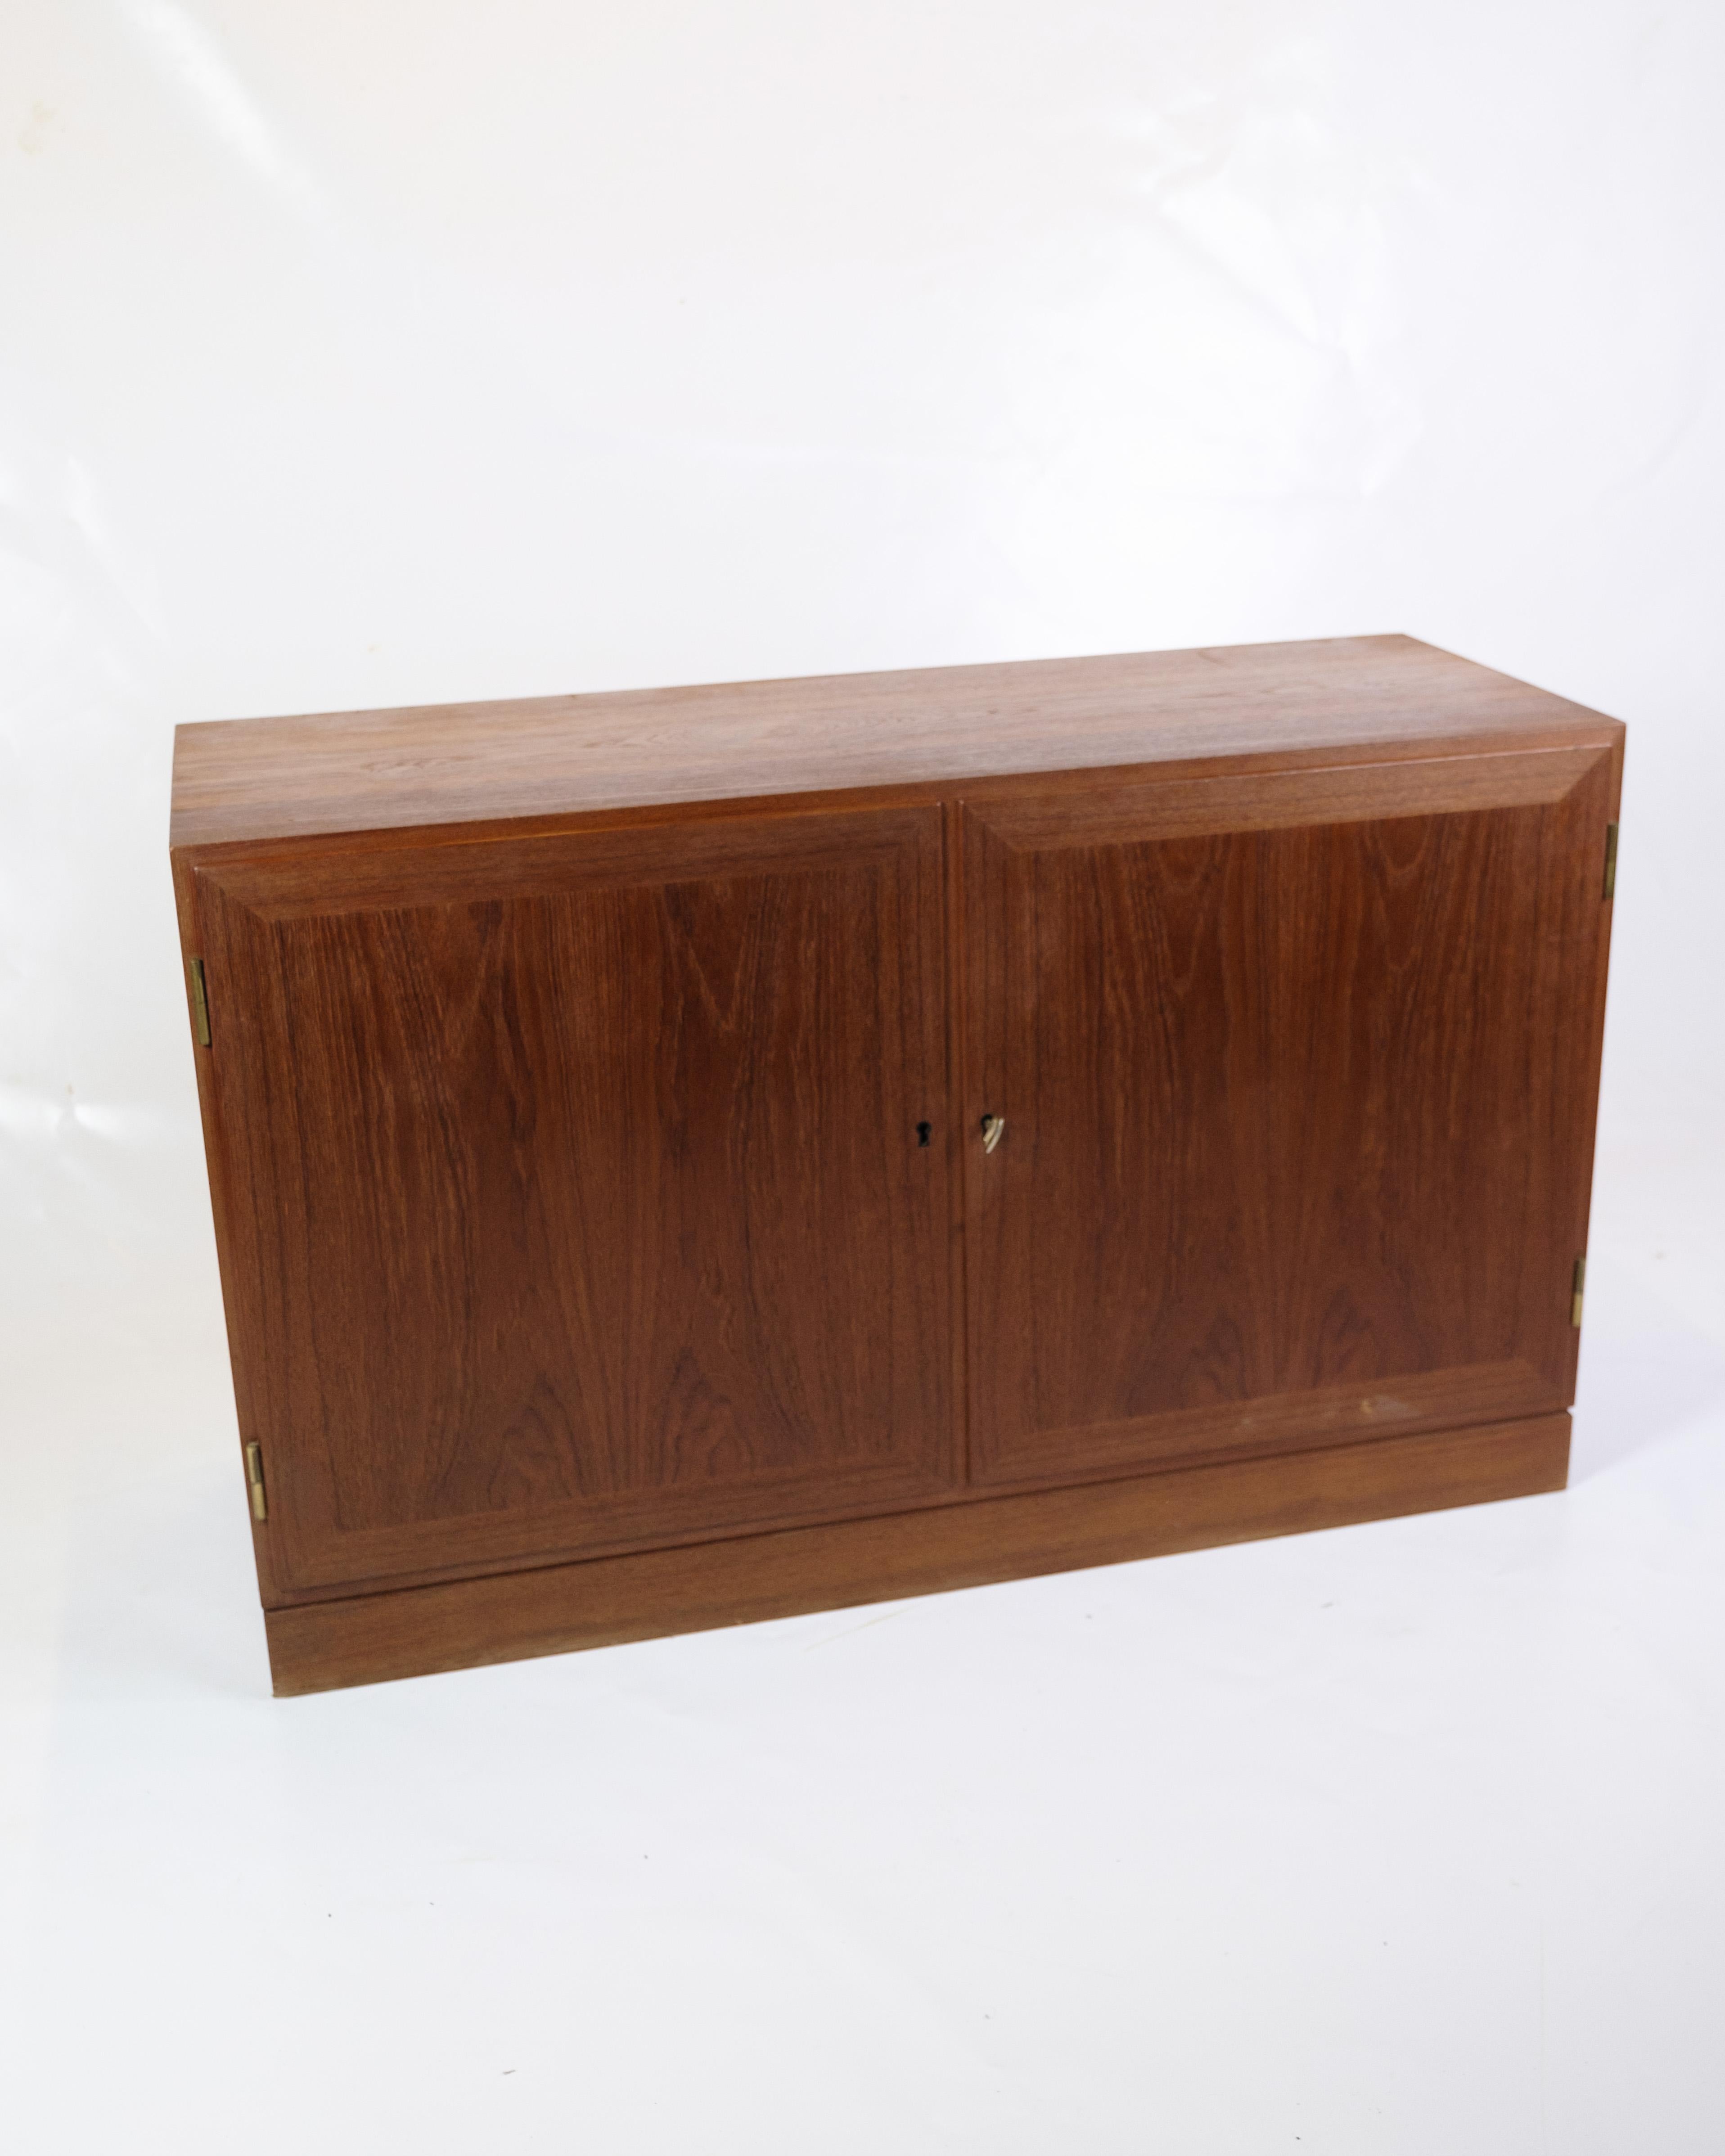 Made of teak and dating from the 1960s, this small sideboard is a beautiful example of period furniture from this era. With its compact design and use of teak wood, the sideboard exudes a timeless elegance and simplicity that is characteristic of